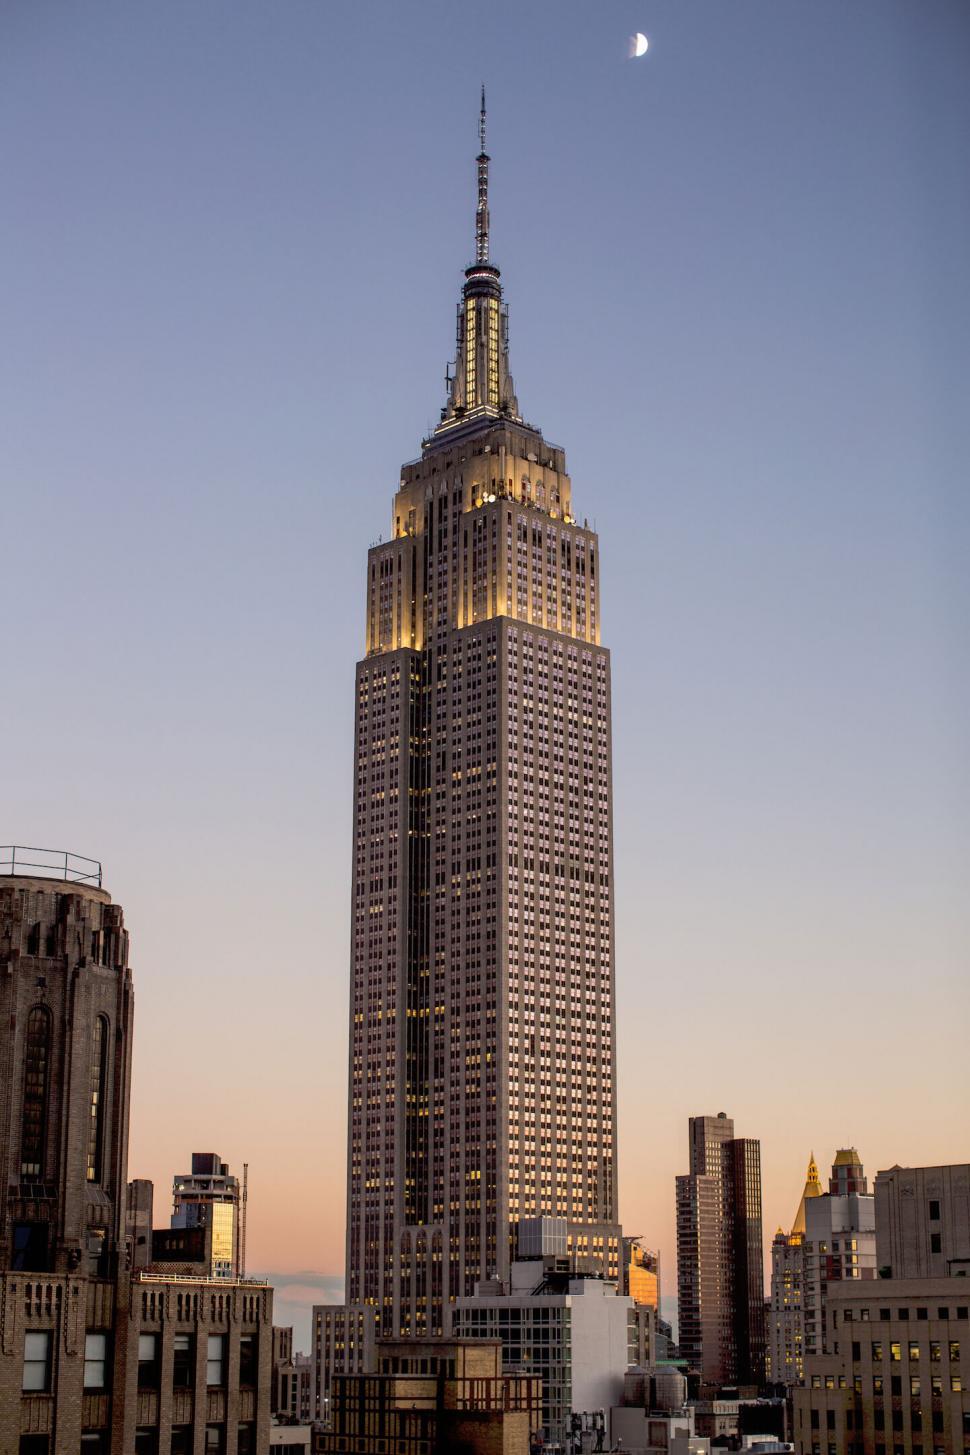 Free Image of Iconic Empire State Building at dusk 